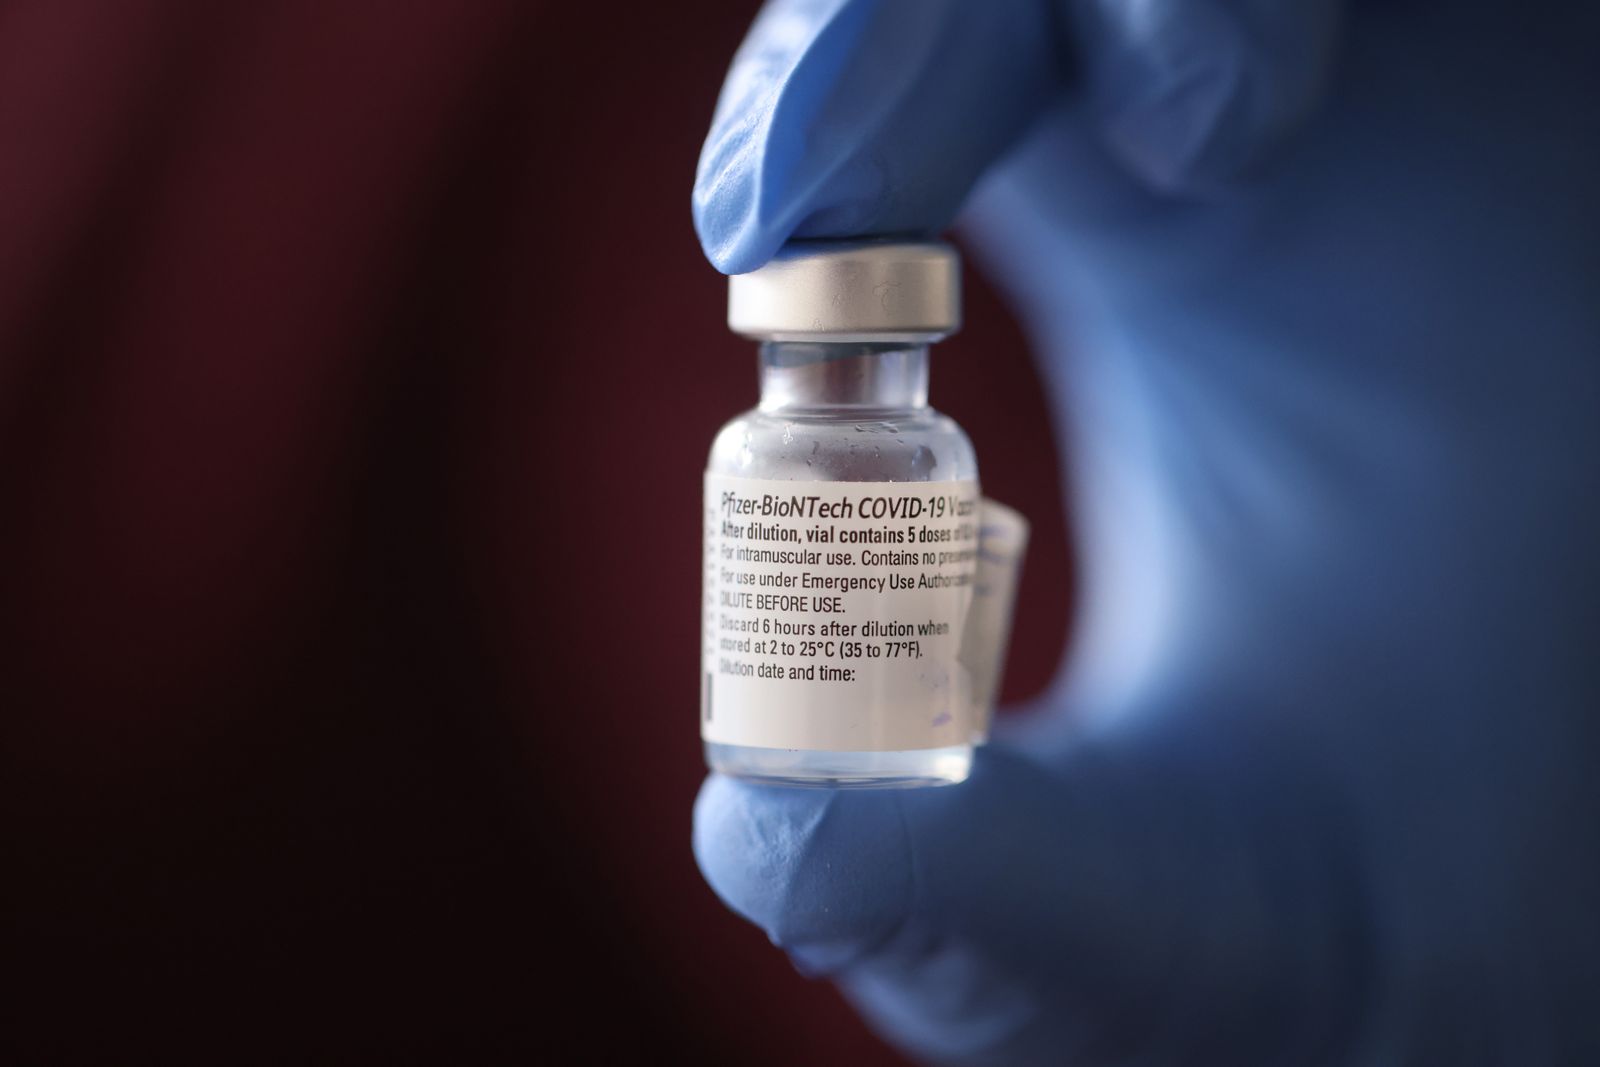 A nurse shows a container of Pfizer-BioNTech COVID-19 vaccine after it was used to vaccinate the first five staff members at Roseland Community Hospital on December 17, 2020 in Chicago, Illinois.